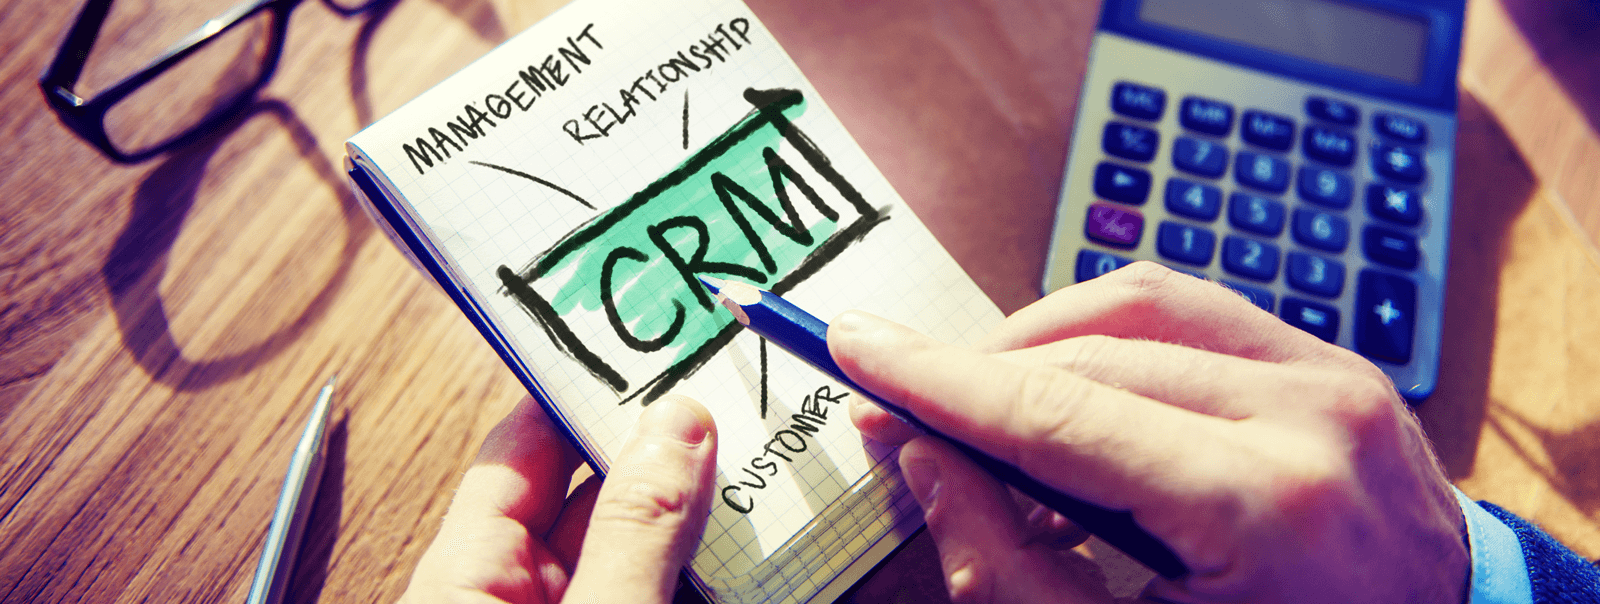 Why develop CRM?